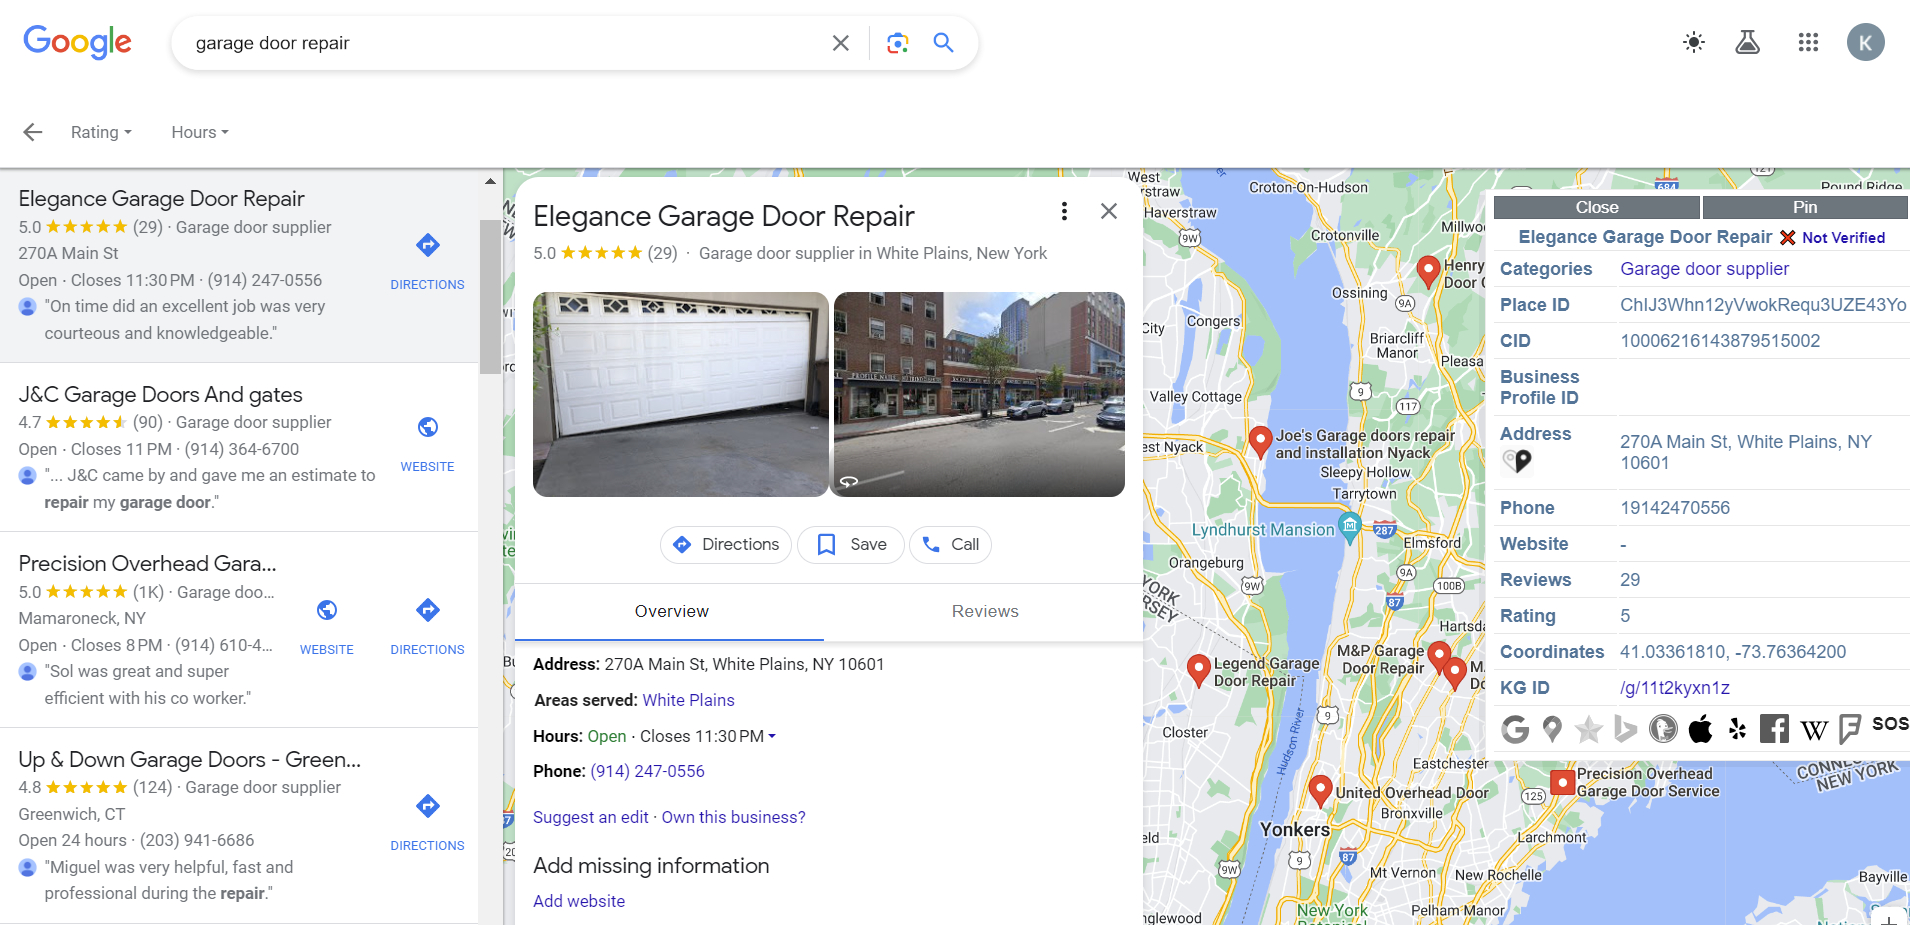 An unverified Google My Business (GMB) listing for a garage door repair company.